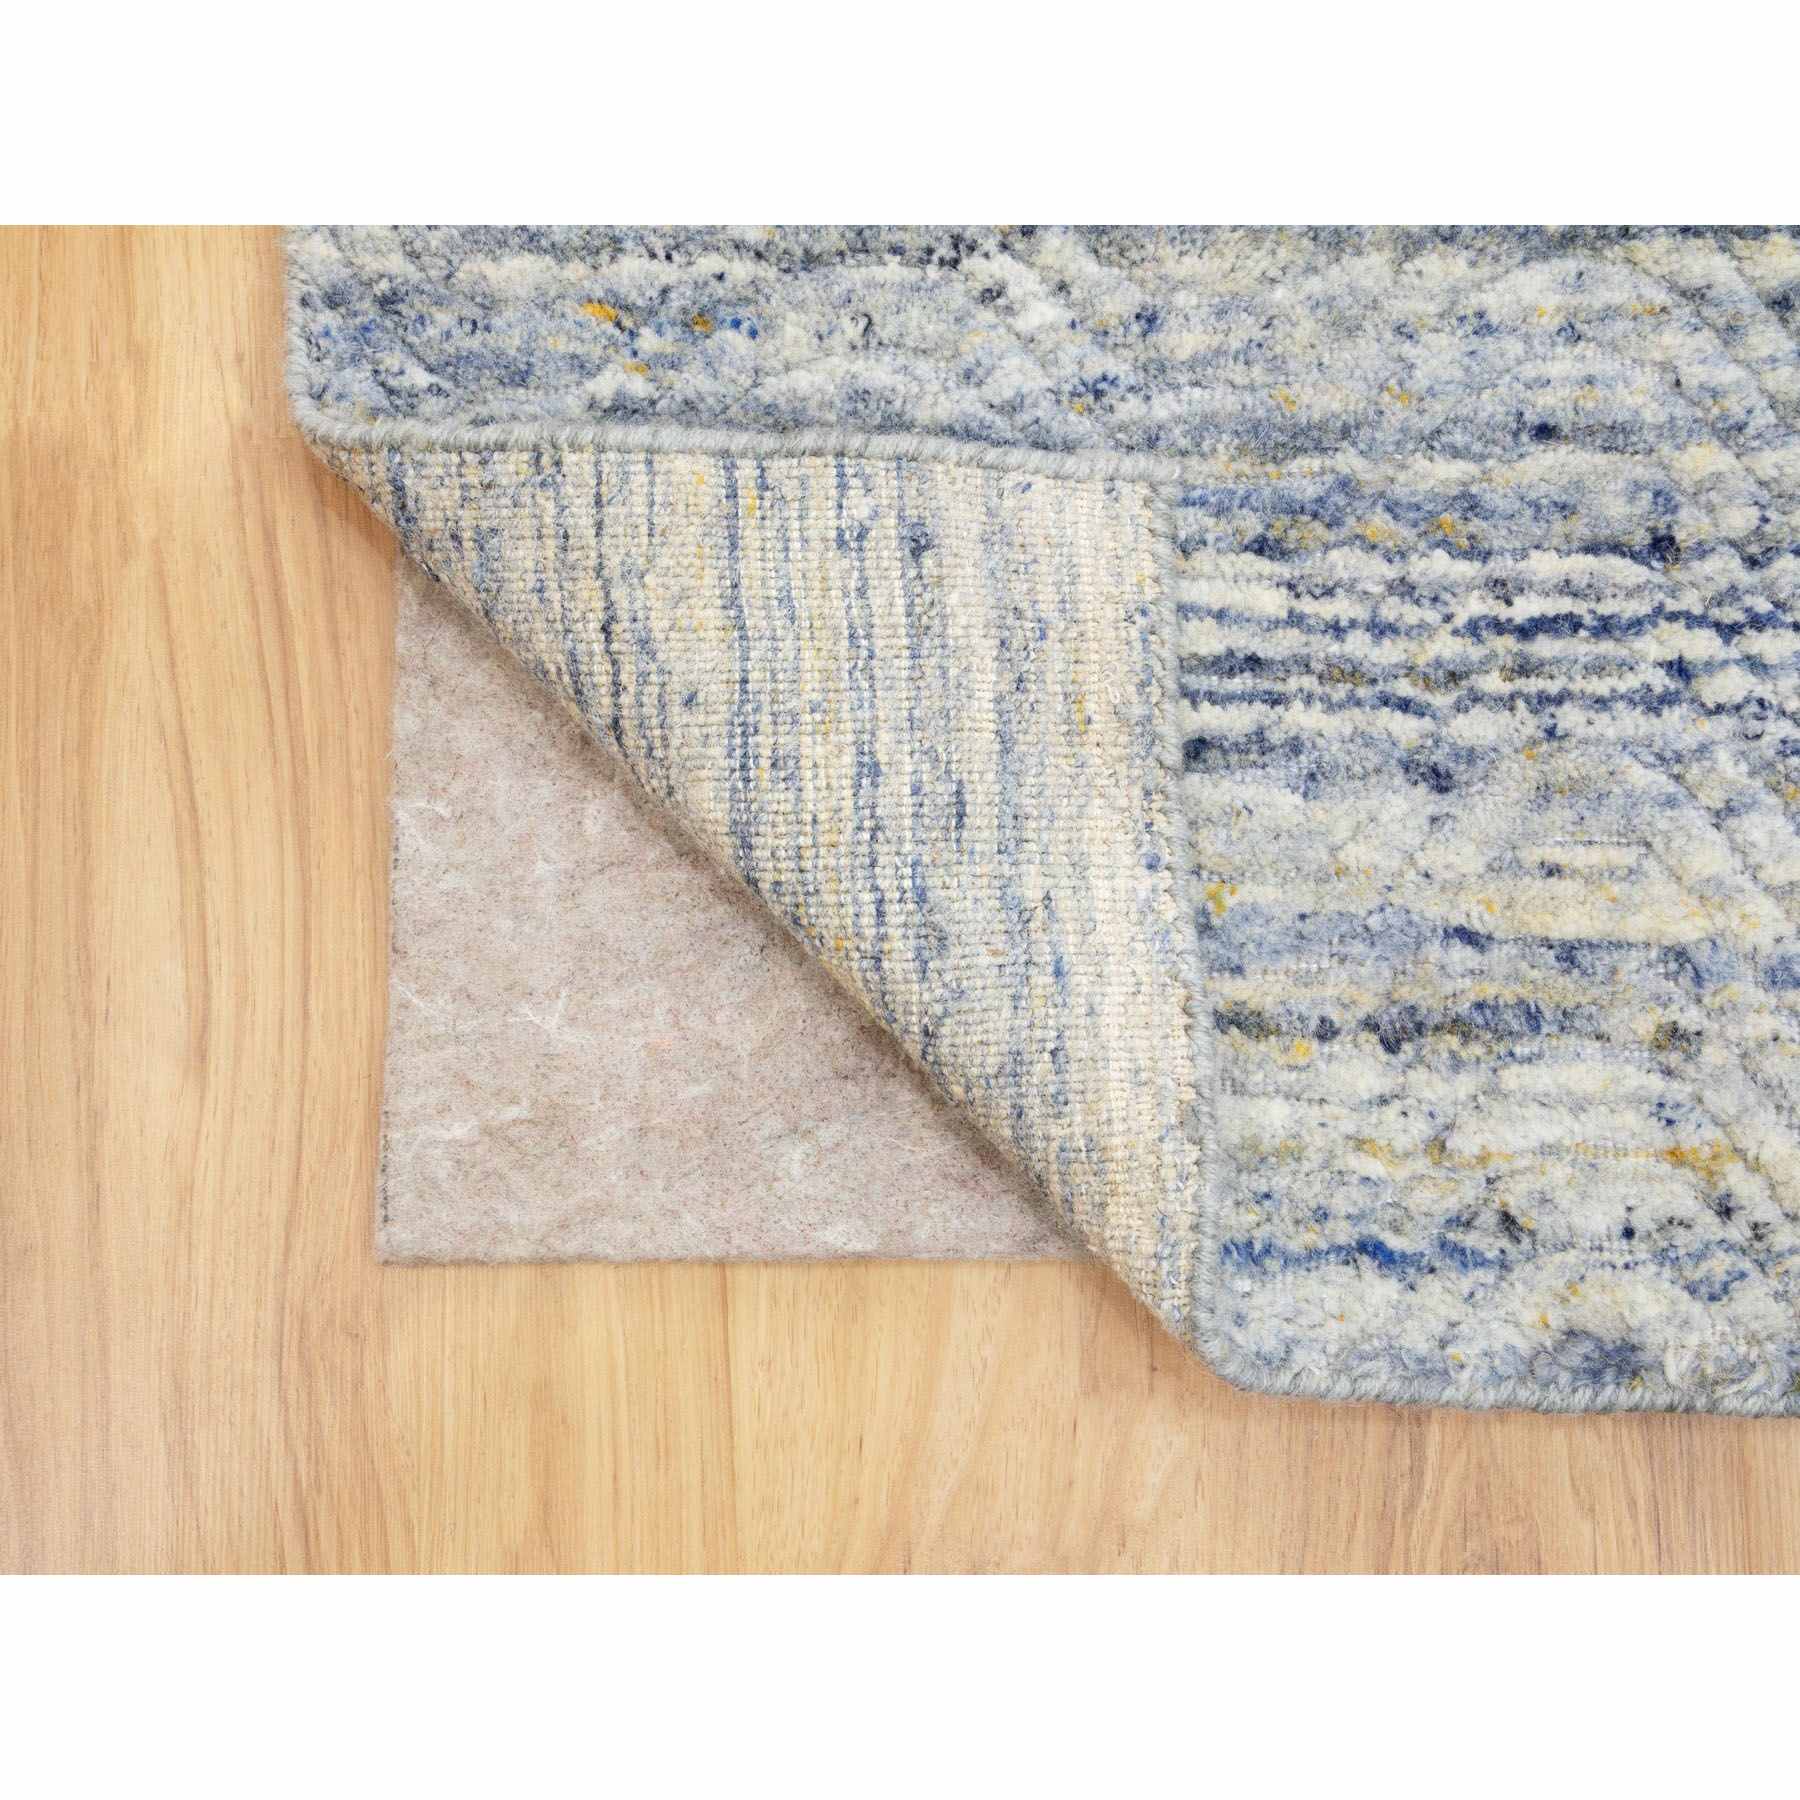 Modern-and-Contemporary-Hand-Loomed-Rug-292010